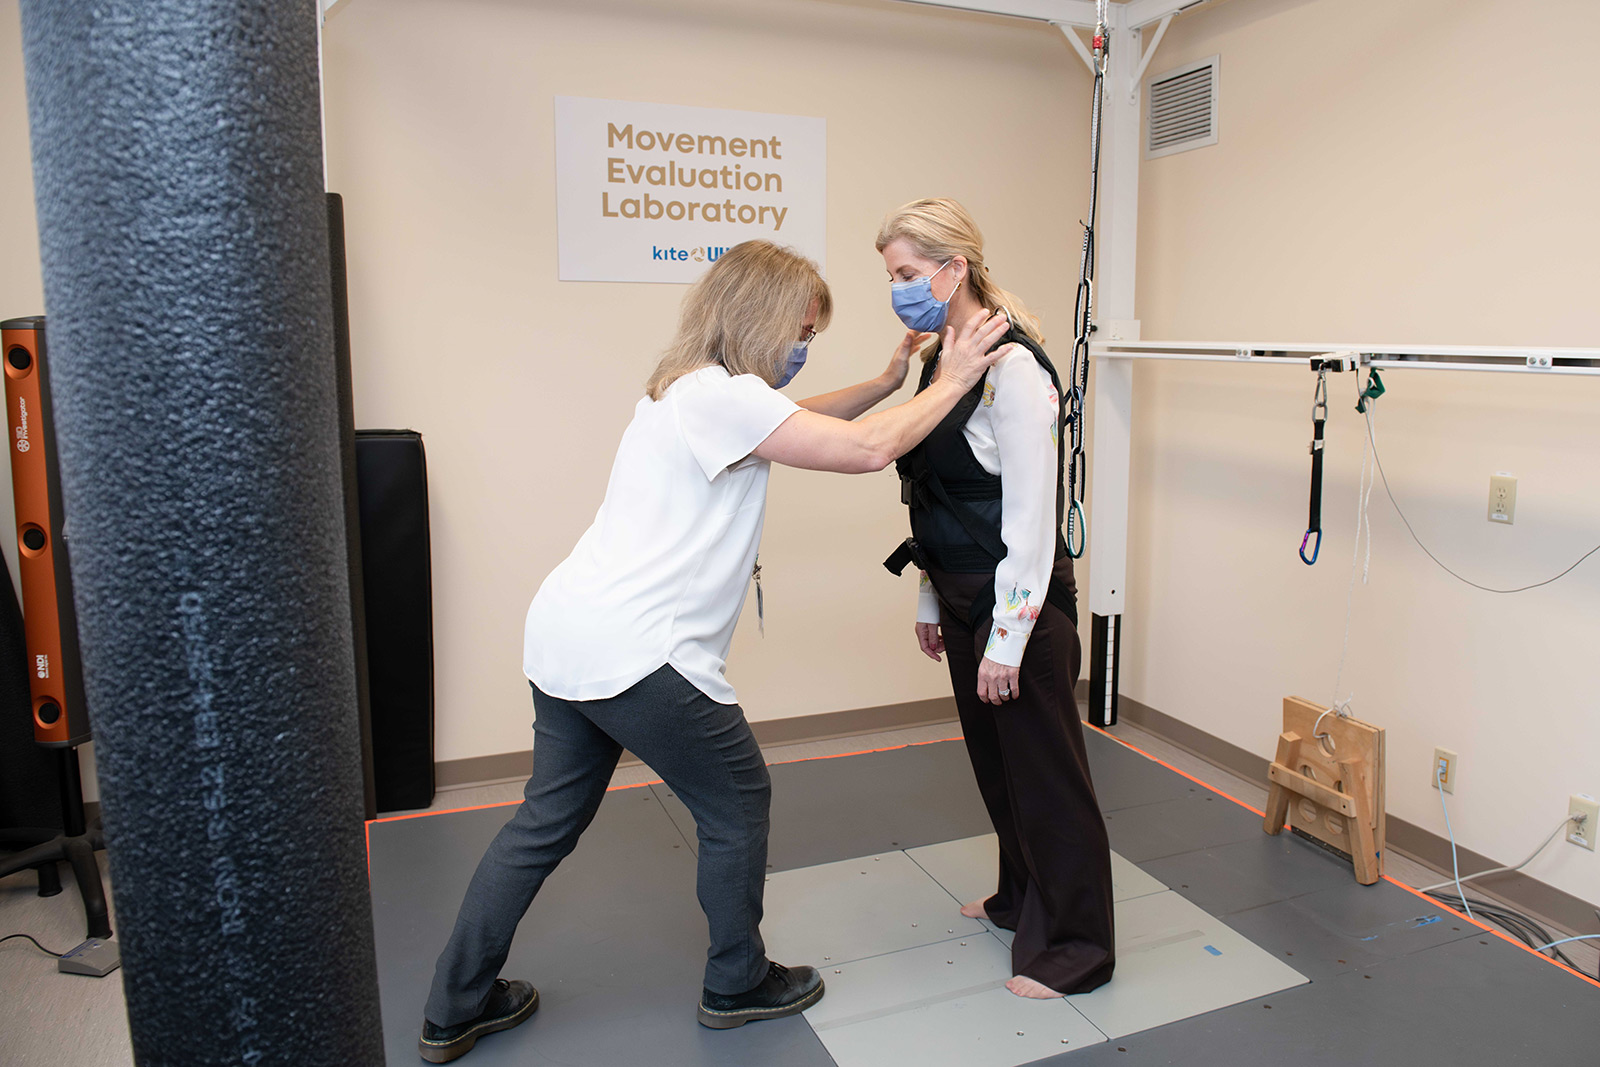 Toronto Rehab is a global leader in physical rehabilitation providing world-class care, research and education. At this facility, The Duchess tried out the Reactive Balance Training Frame and Harness in the Movement Evaluation Laboratory.